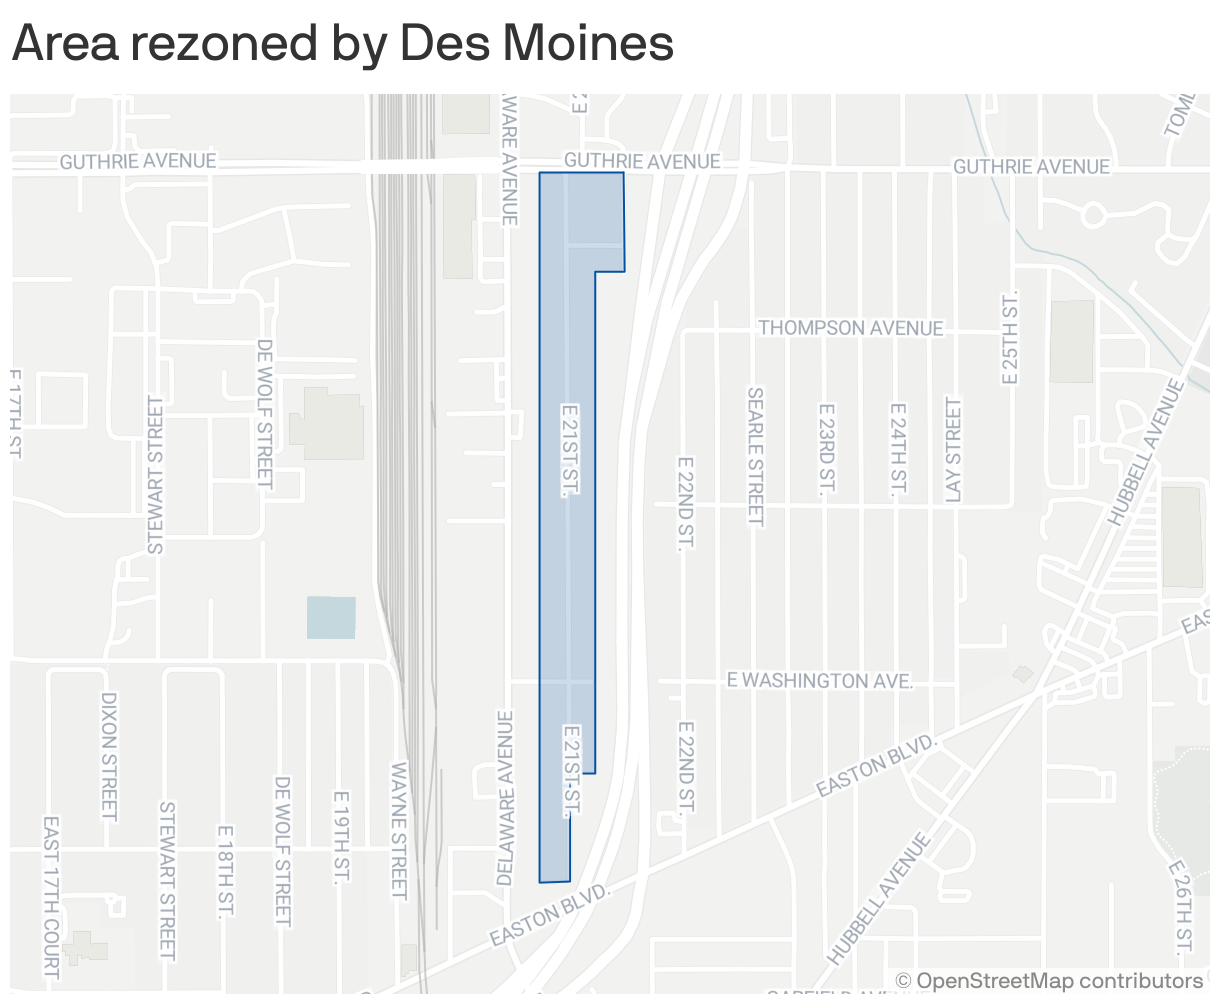 Area rezoned by Des Moines